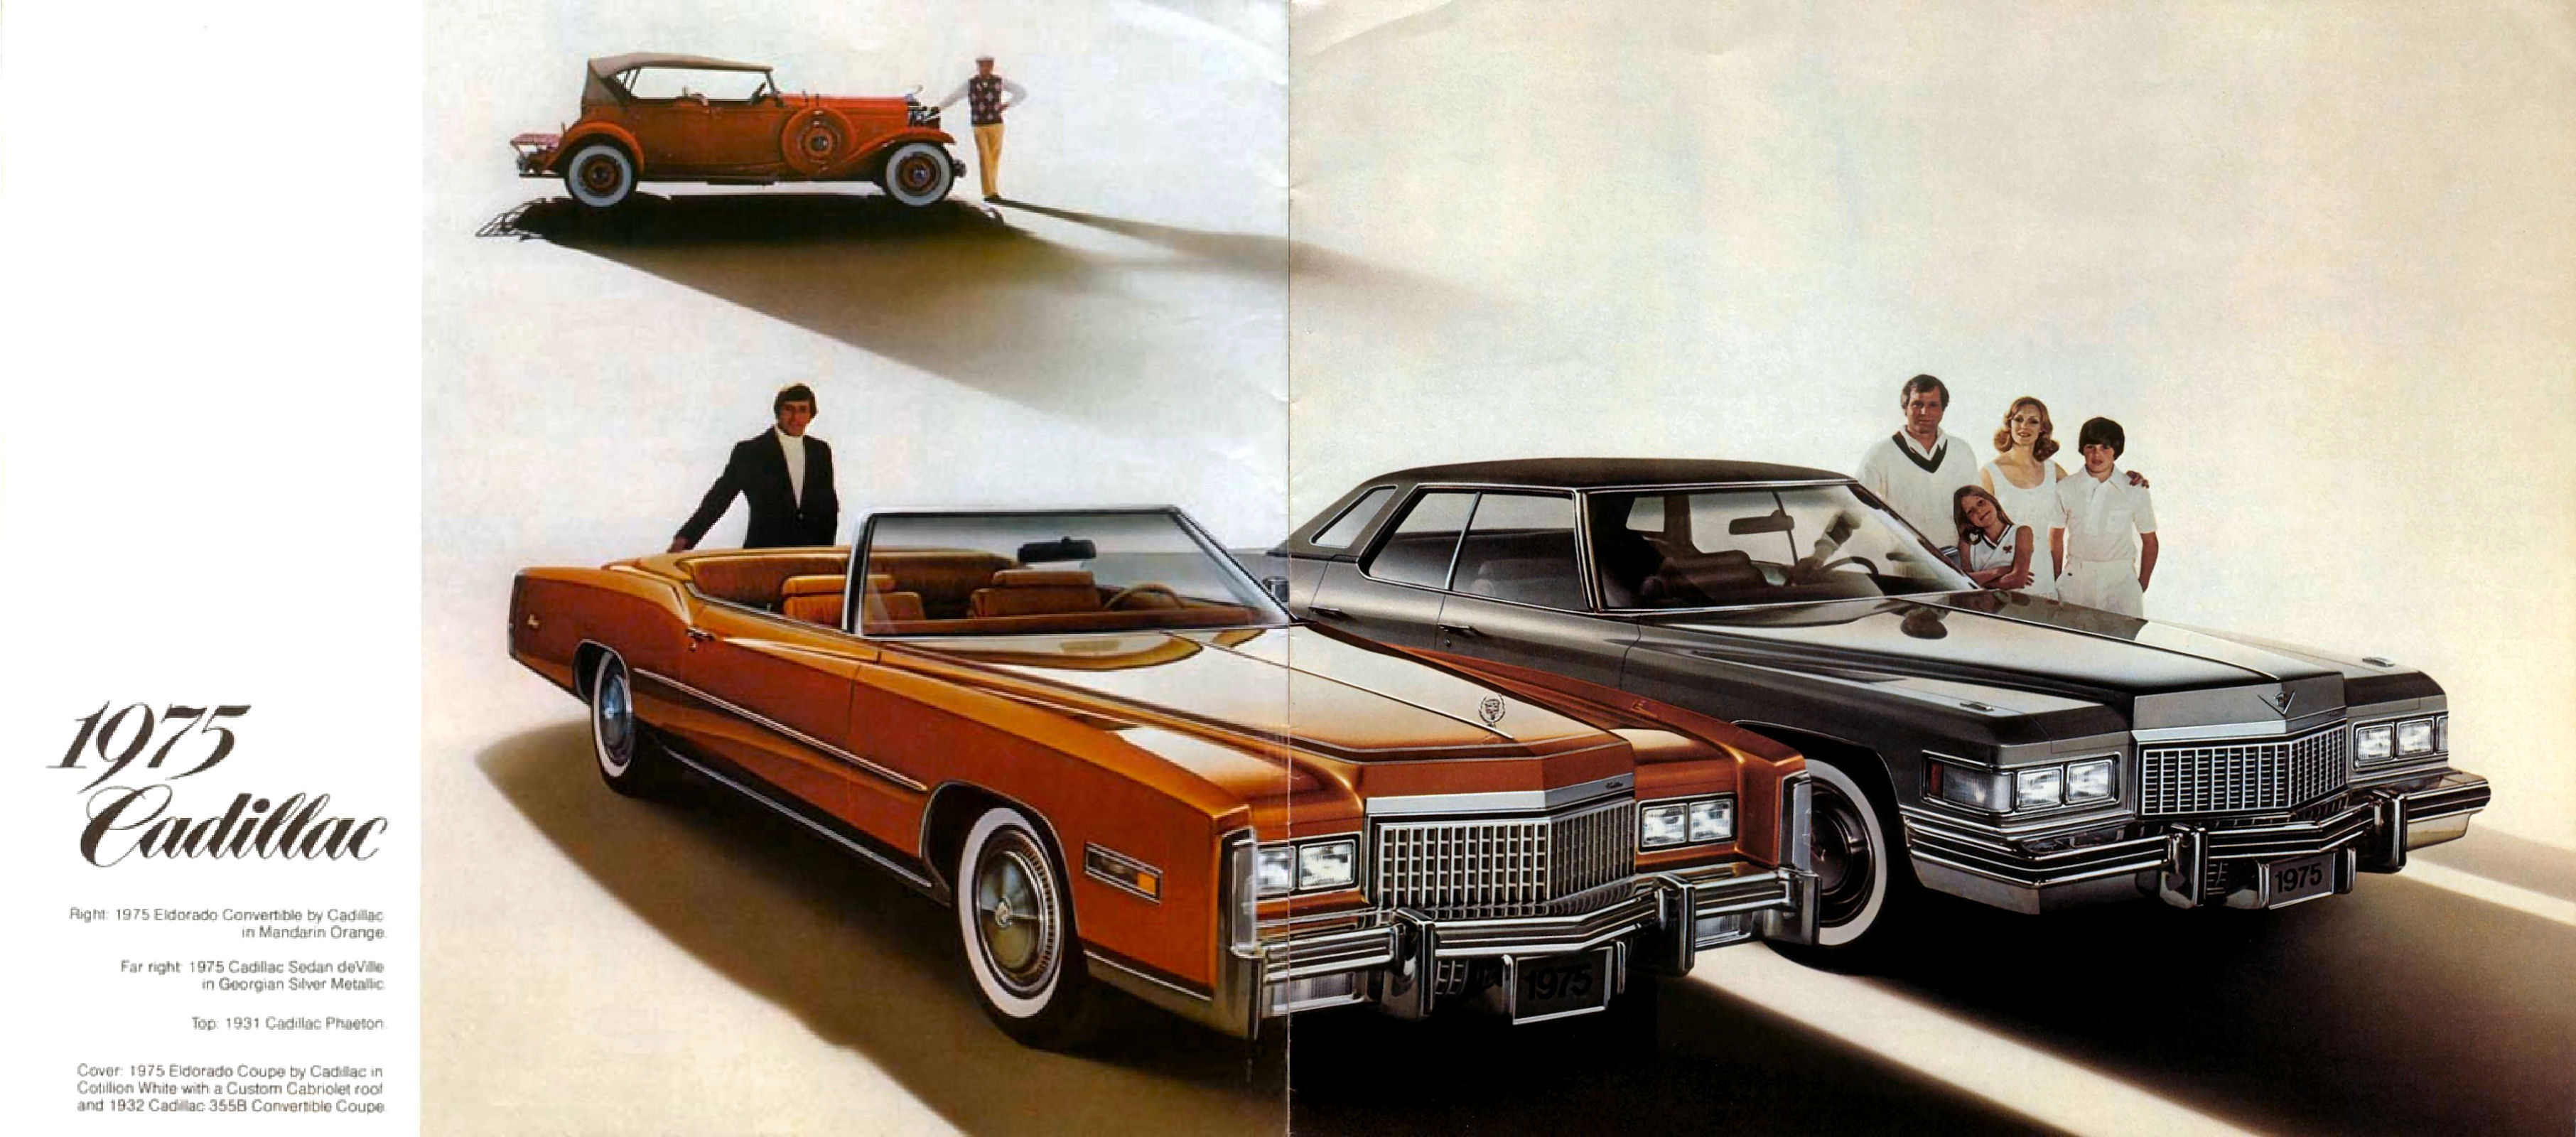 1975 Cadillac Then _ Now Mailer-02-03